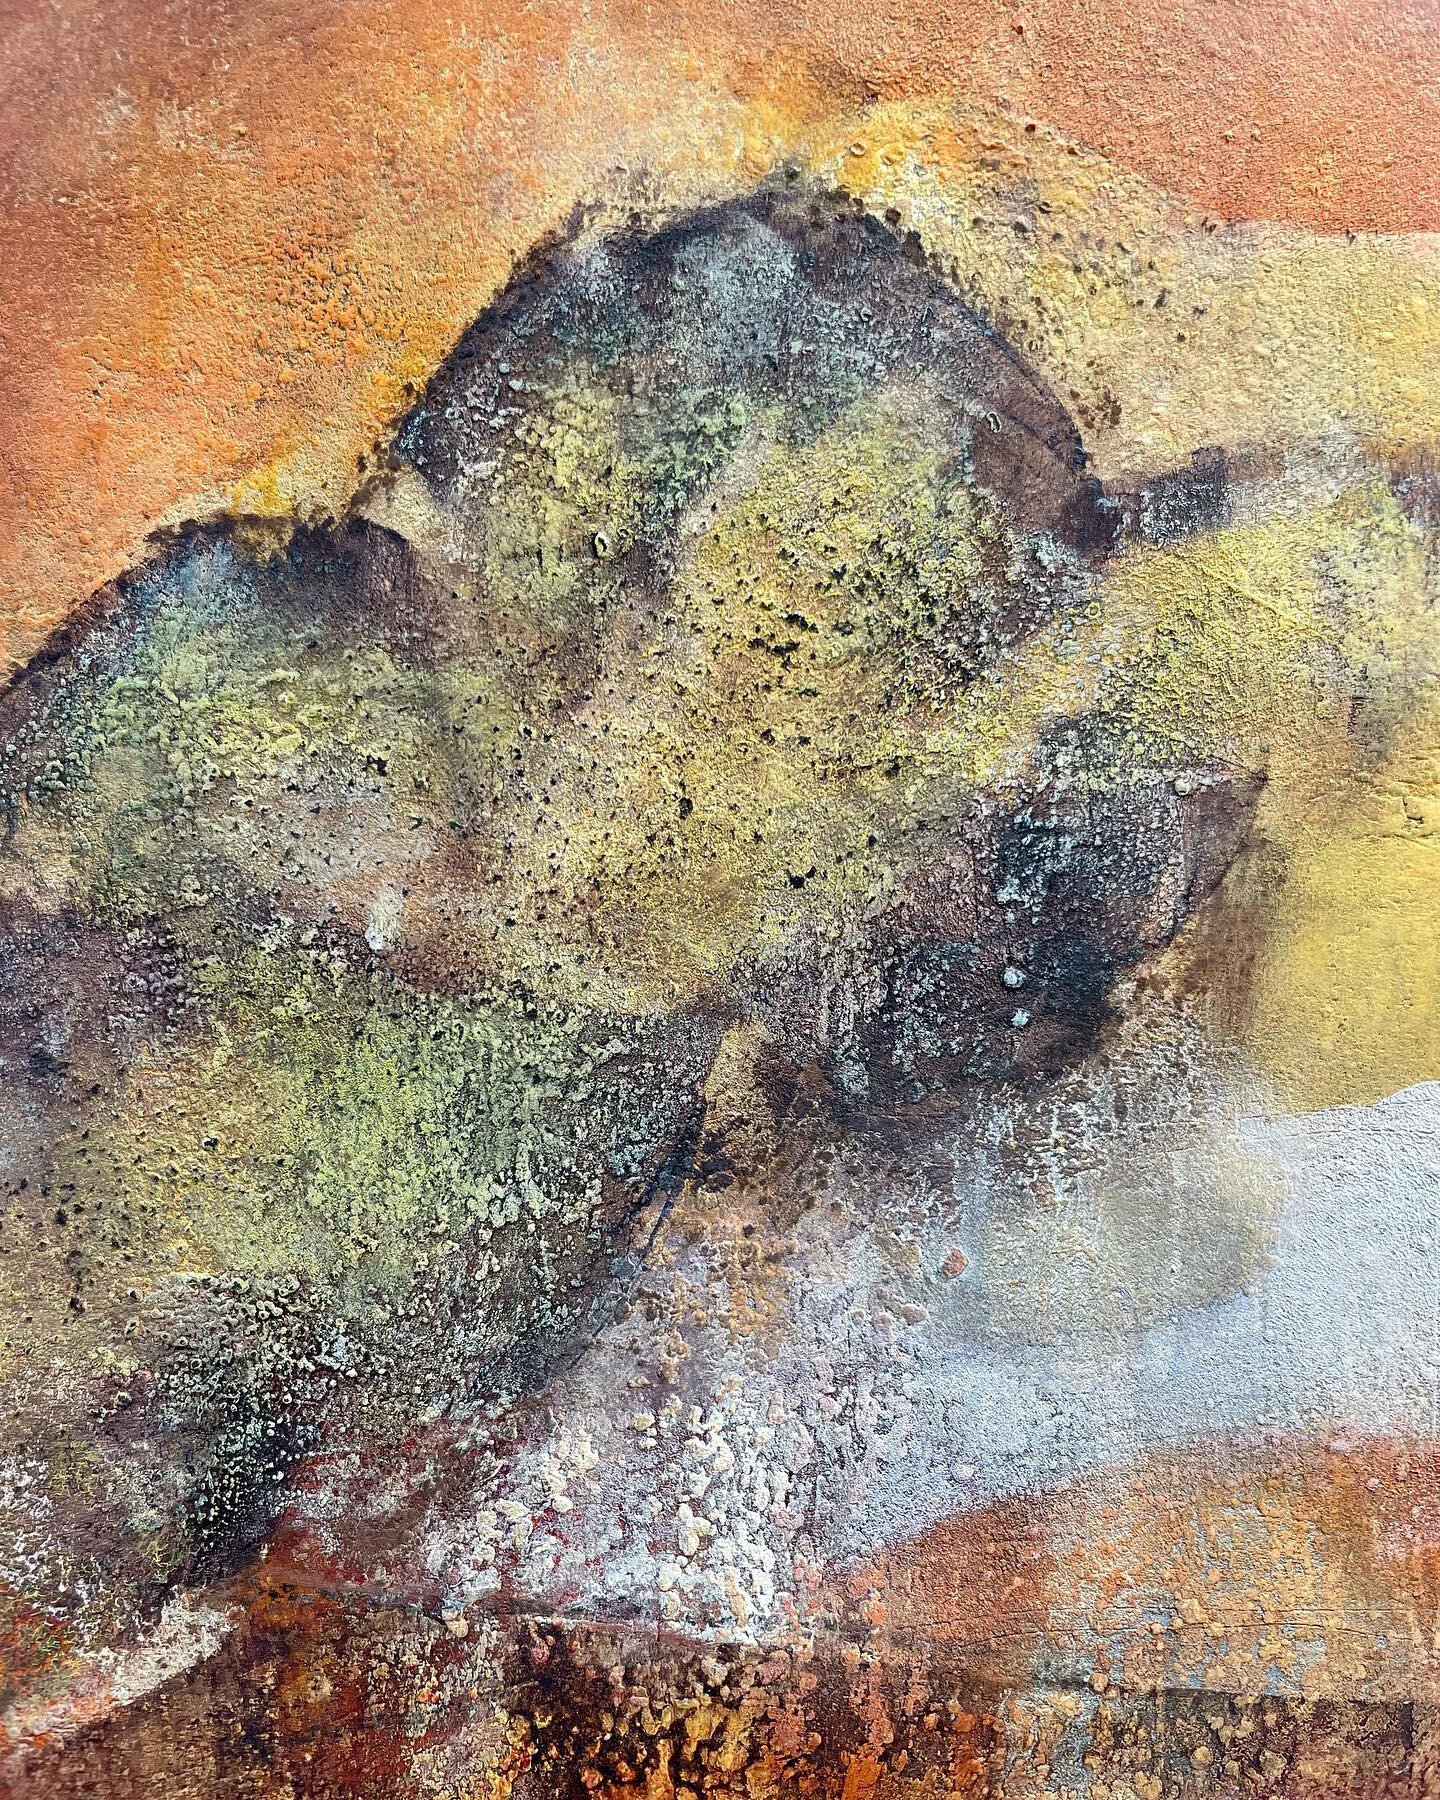 Details of &ldquo;Homeward Bound&rdquo;, a 48 x36 inch painting full of rich earth and texture. 

#warmpalette #richpalette #jencrowestudio #jencrowe #abstractpainting #itsallinthedetail #waxpainting